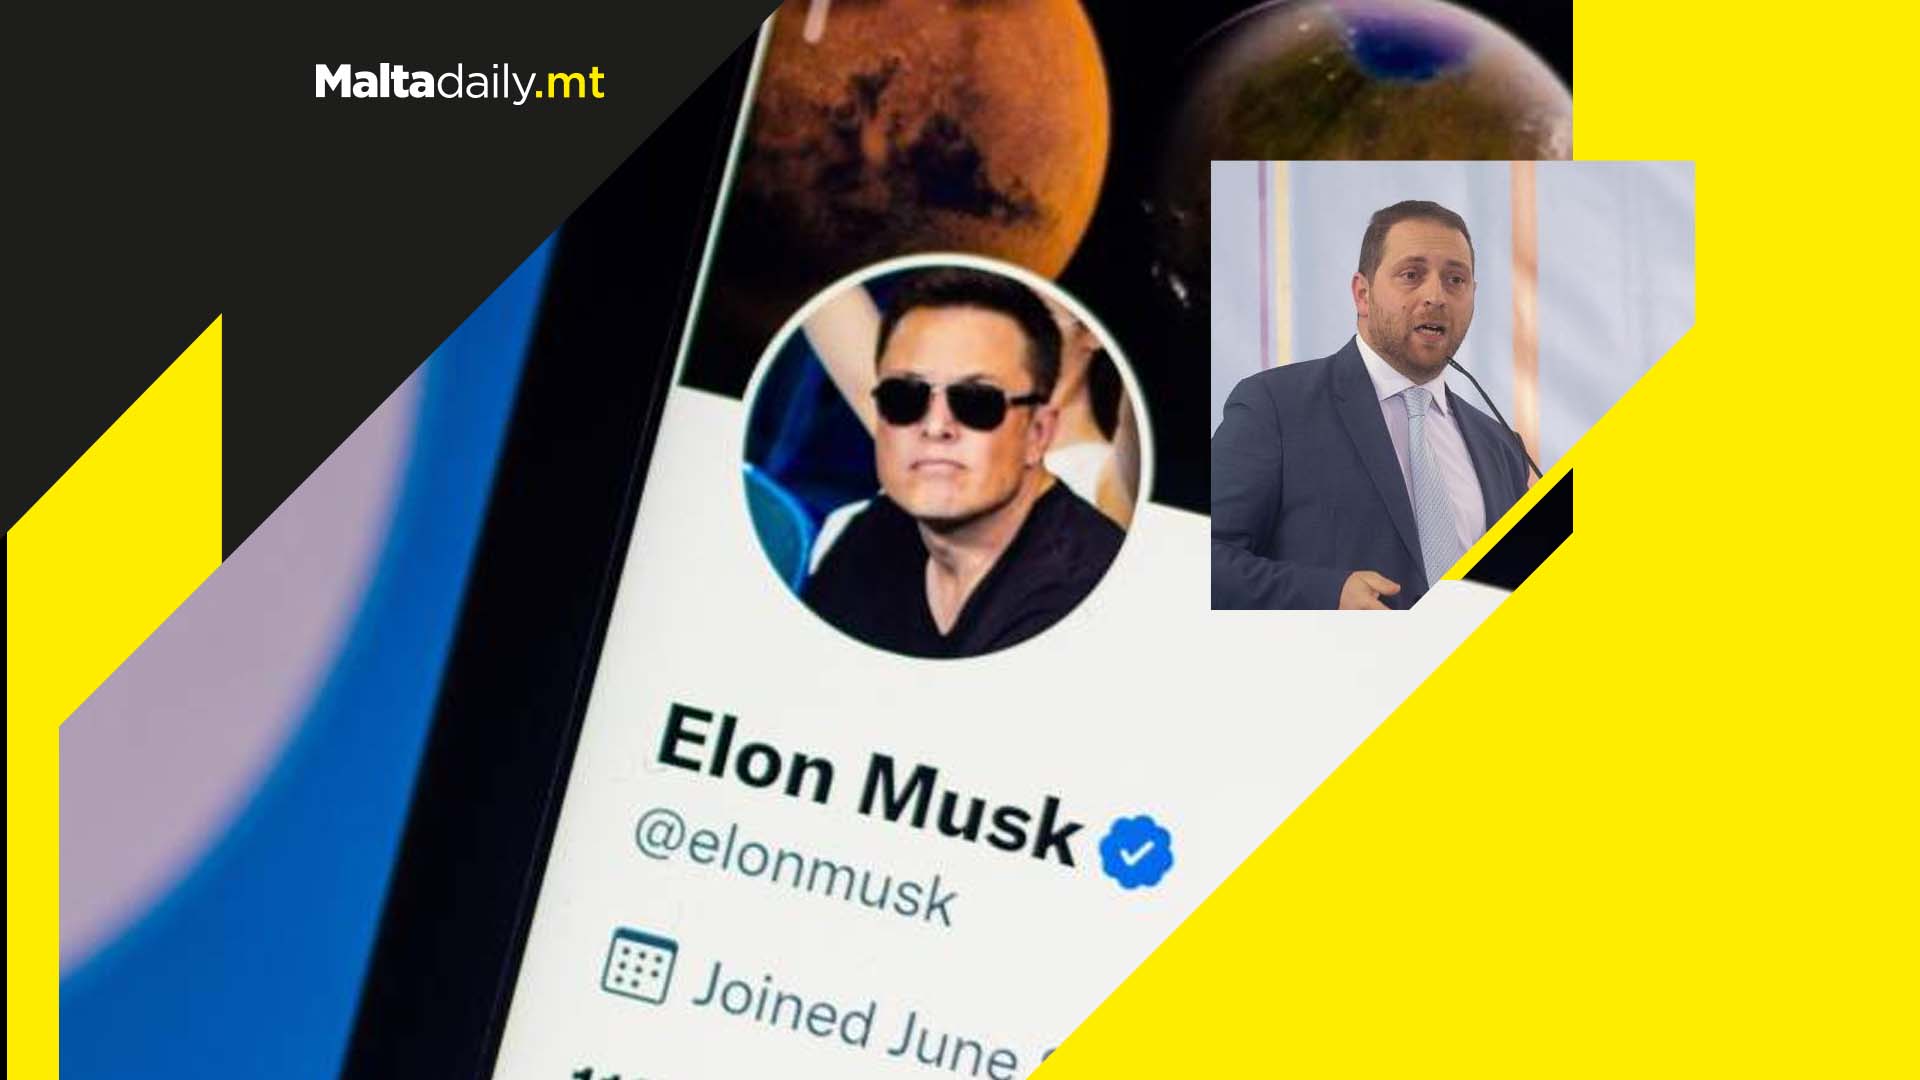 ‘We won’t let you turn Twitter into a forum for hate’ Maltese MEP warns Elon Musk